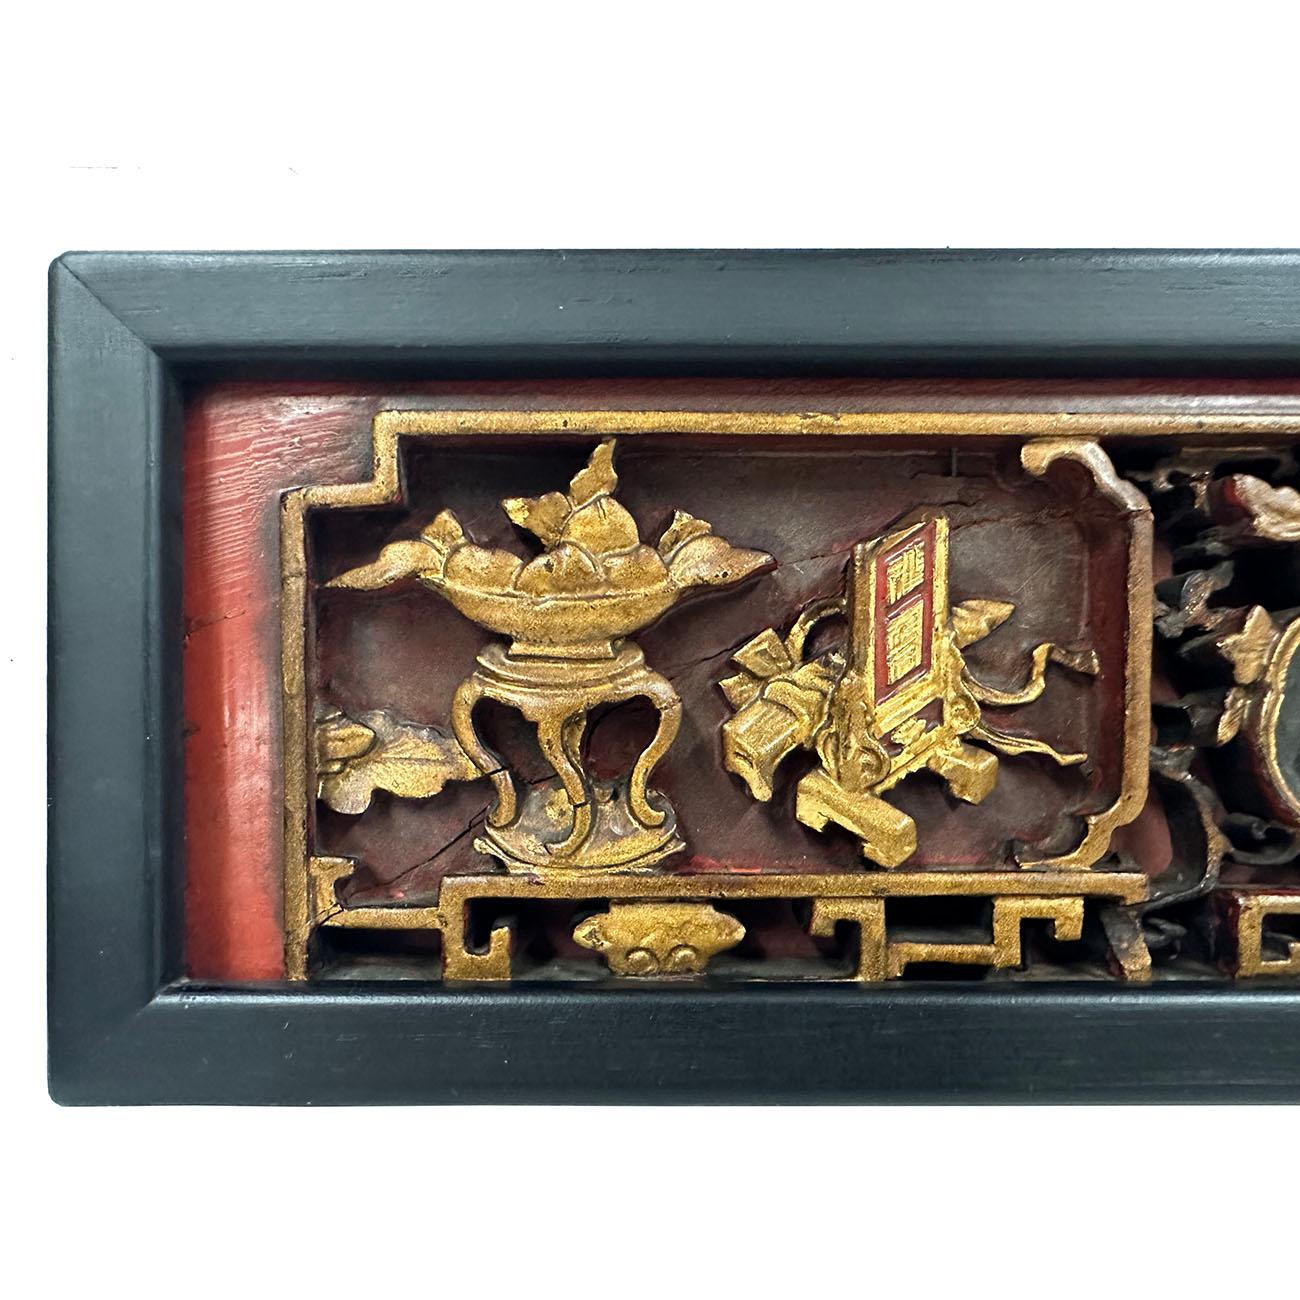 This antique Chinese wood carving panel has very deep 3D carving works of Chinese folks art - Chinese Opera with gilt. Very detailed carving works. Panels is carved from one piece of wood with black wood frame. The intricate gilt pierced carving is